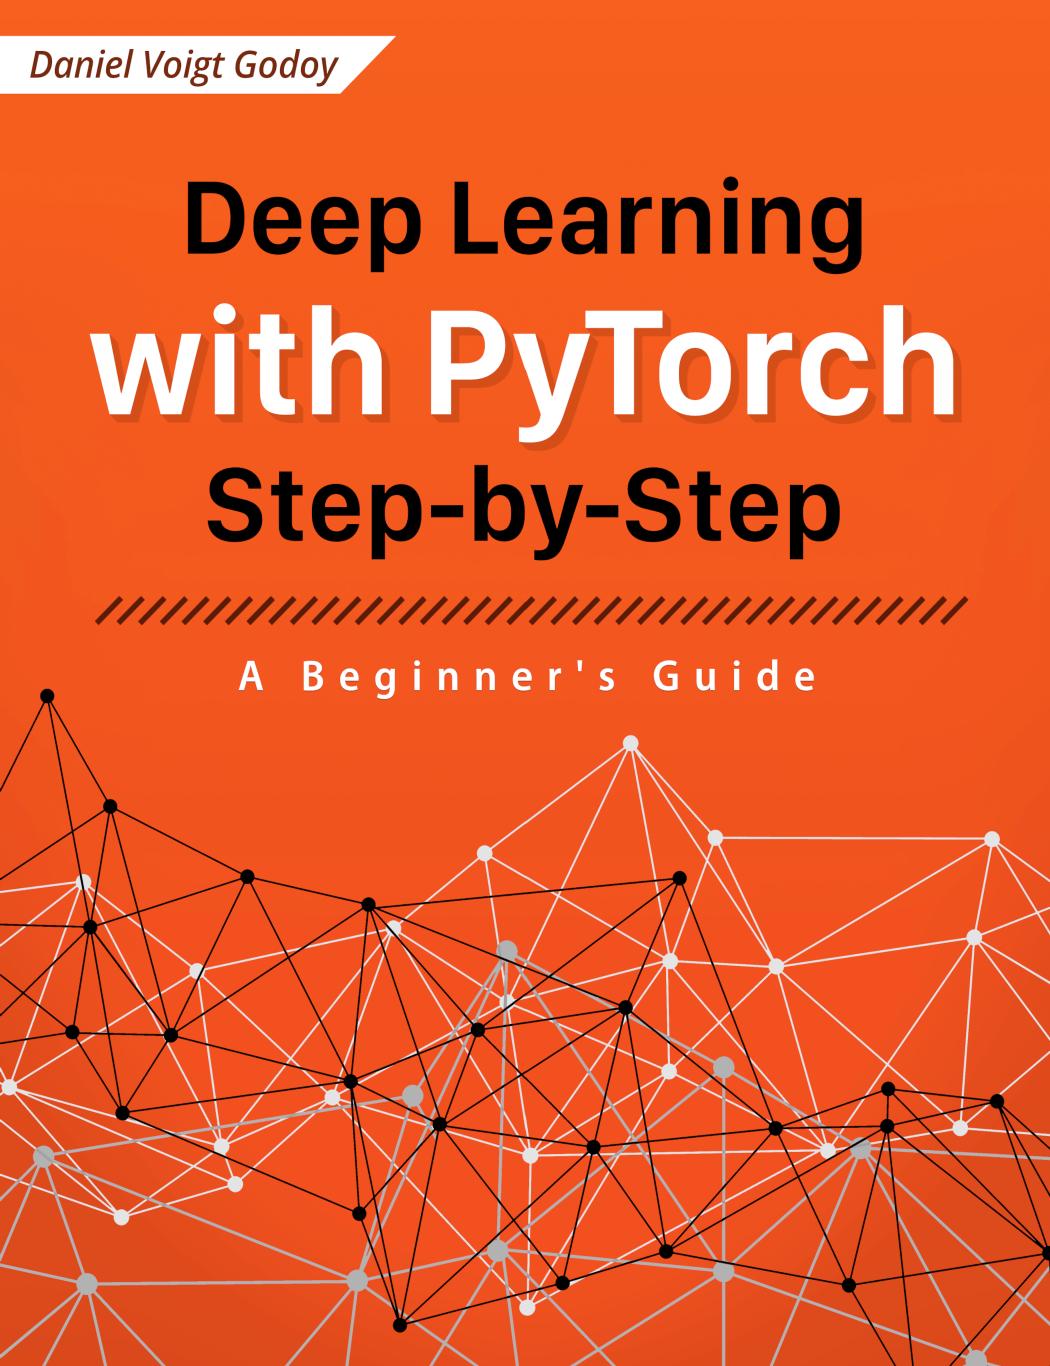 Deep Learning with PyTorch Step-by-Step: A Beginner’s Guide